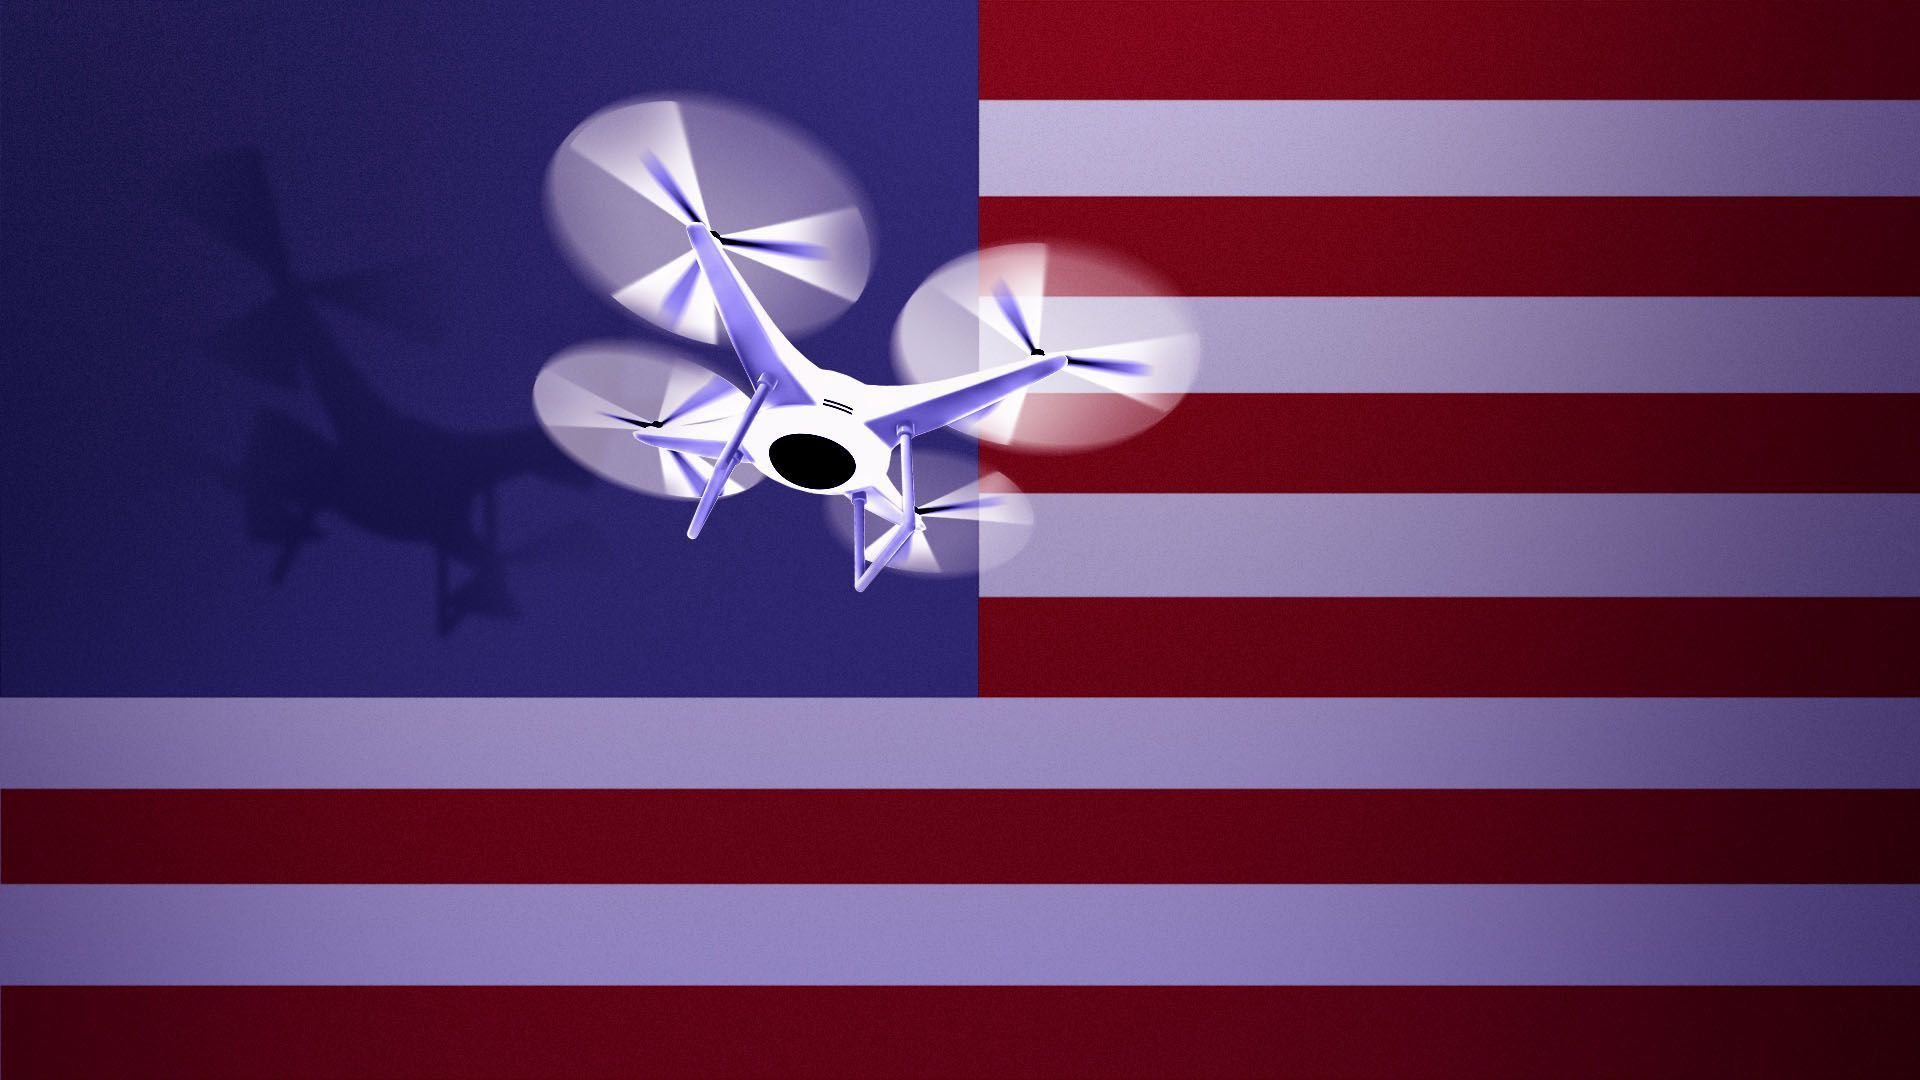 An illustration of a drone in front of a flag.